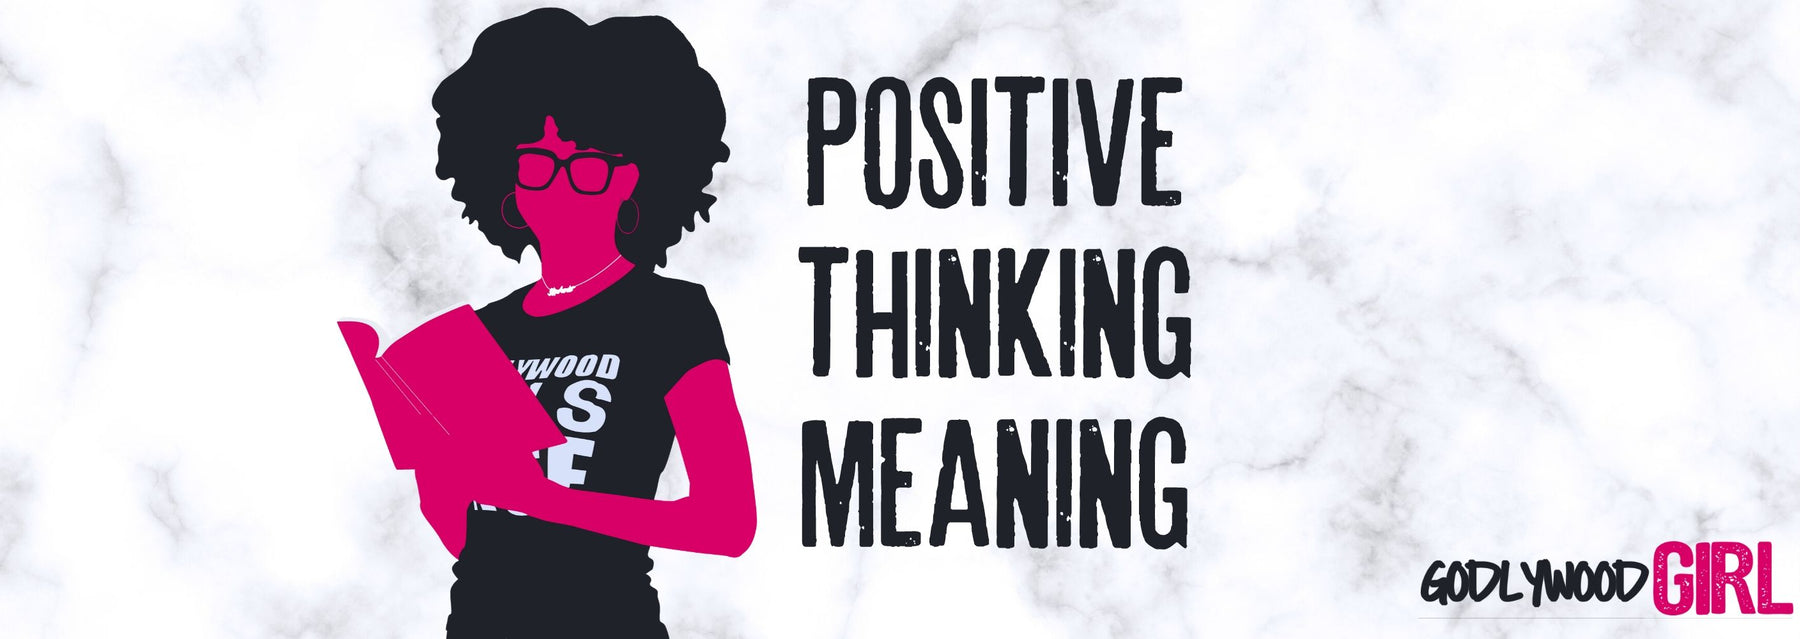 POSITIVE THINKING MEANING (What Is Positive Thinking & Why Is It Important?) || HOW TO